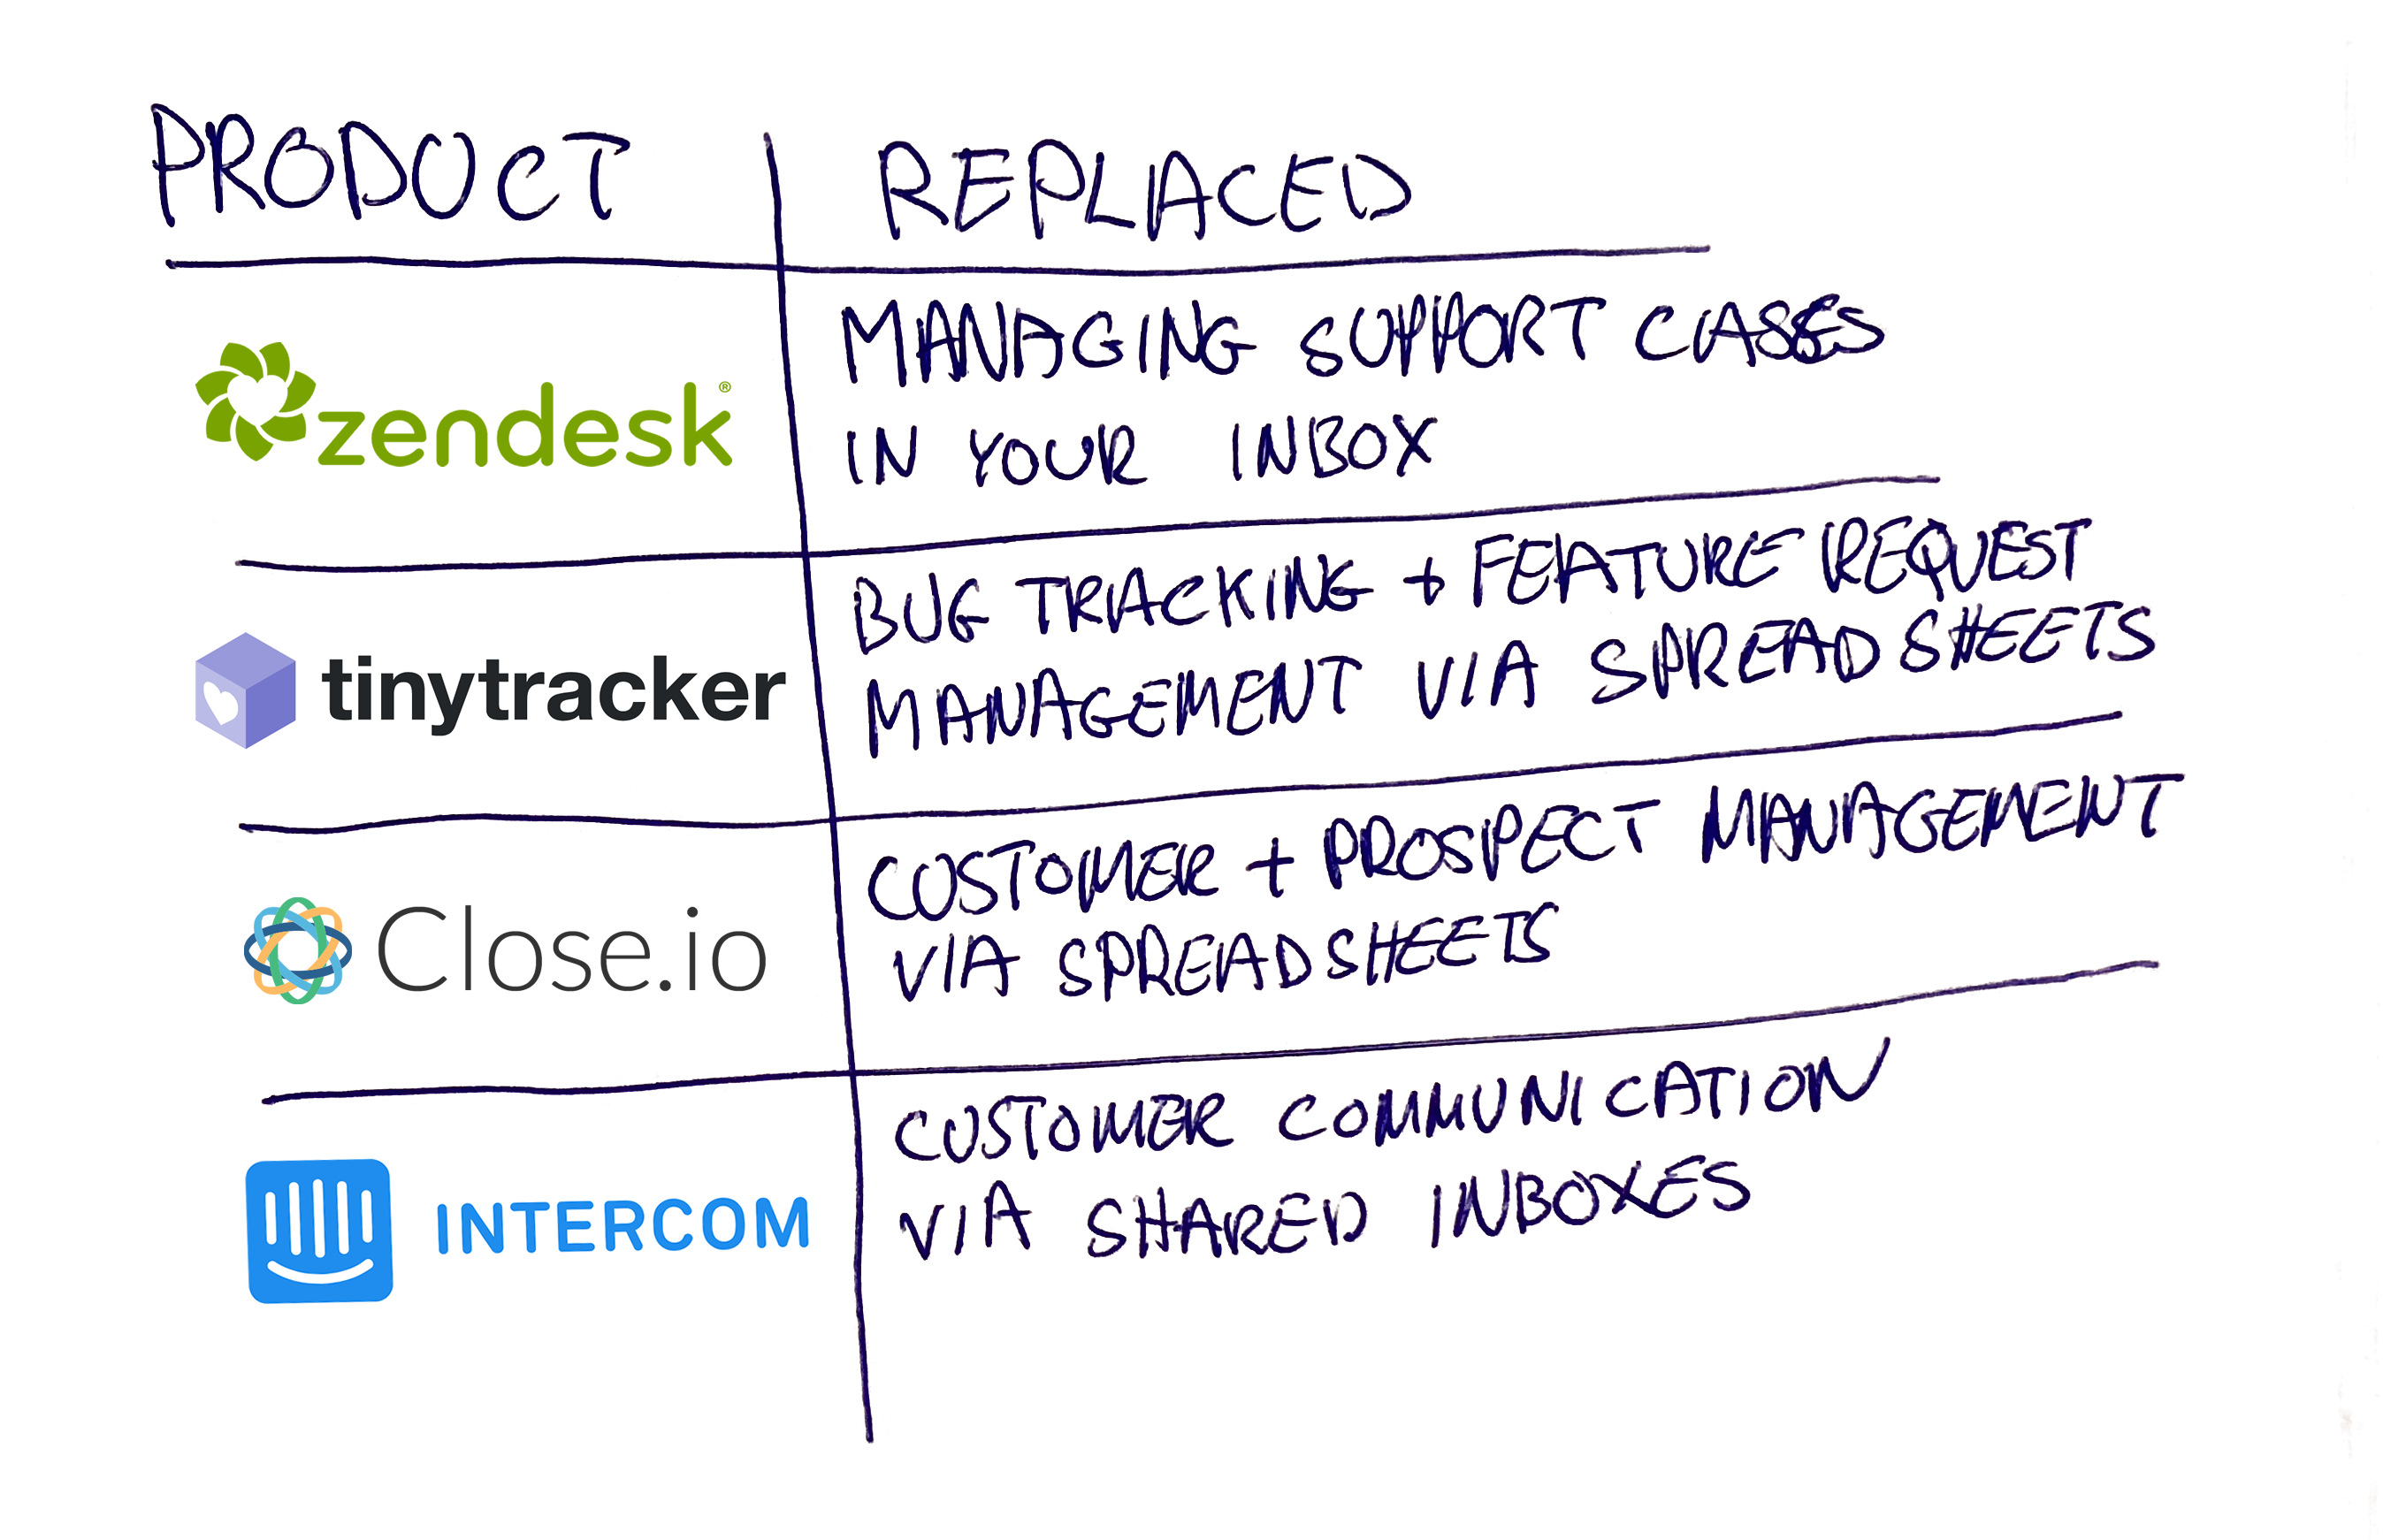 TinyTracker Products Replace Process